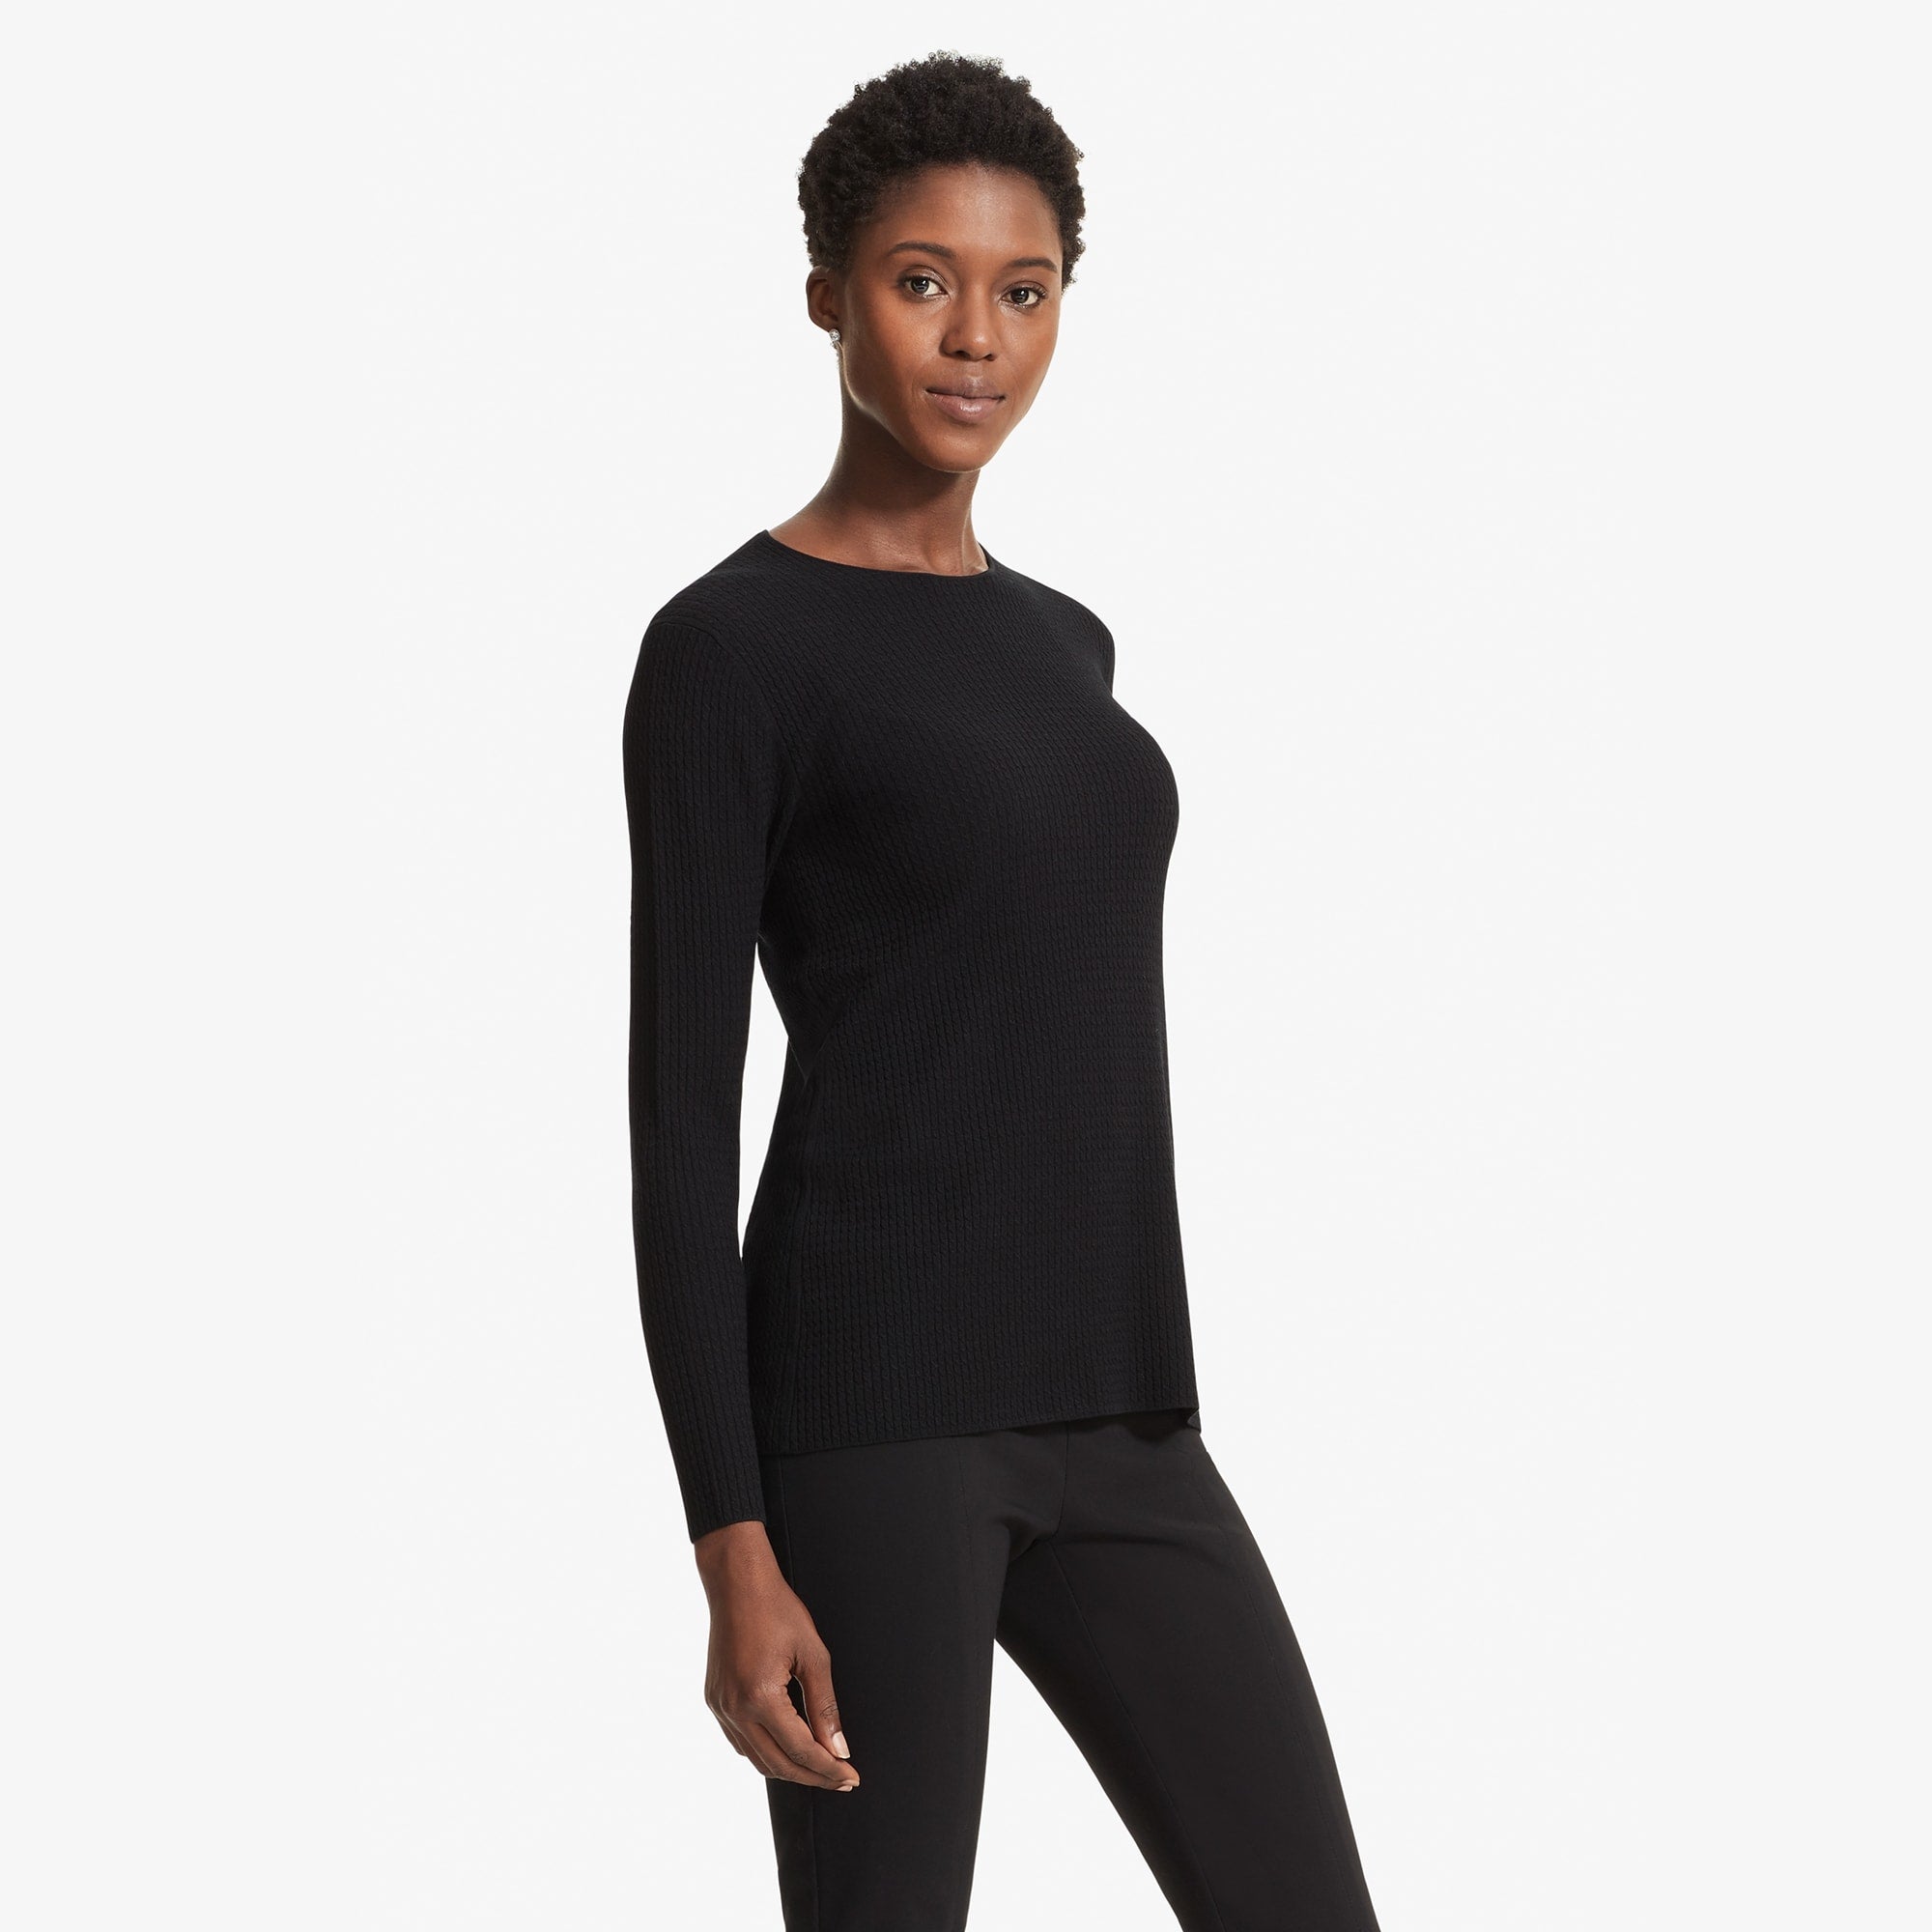 Side image of a woman standing wearing the Loraine top in Black